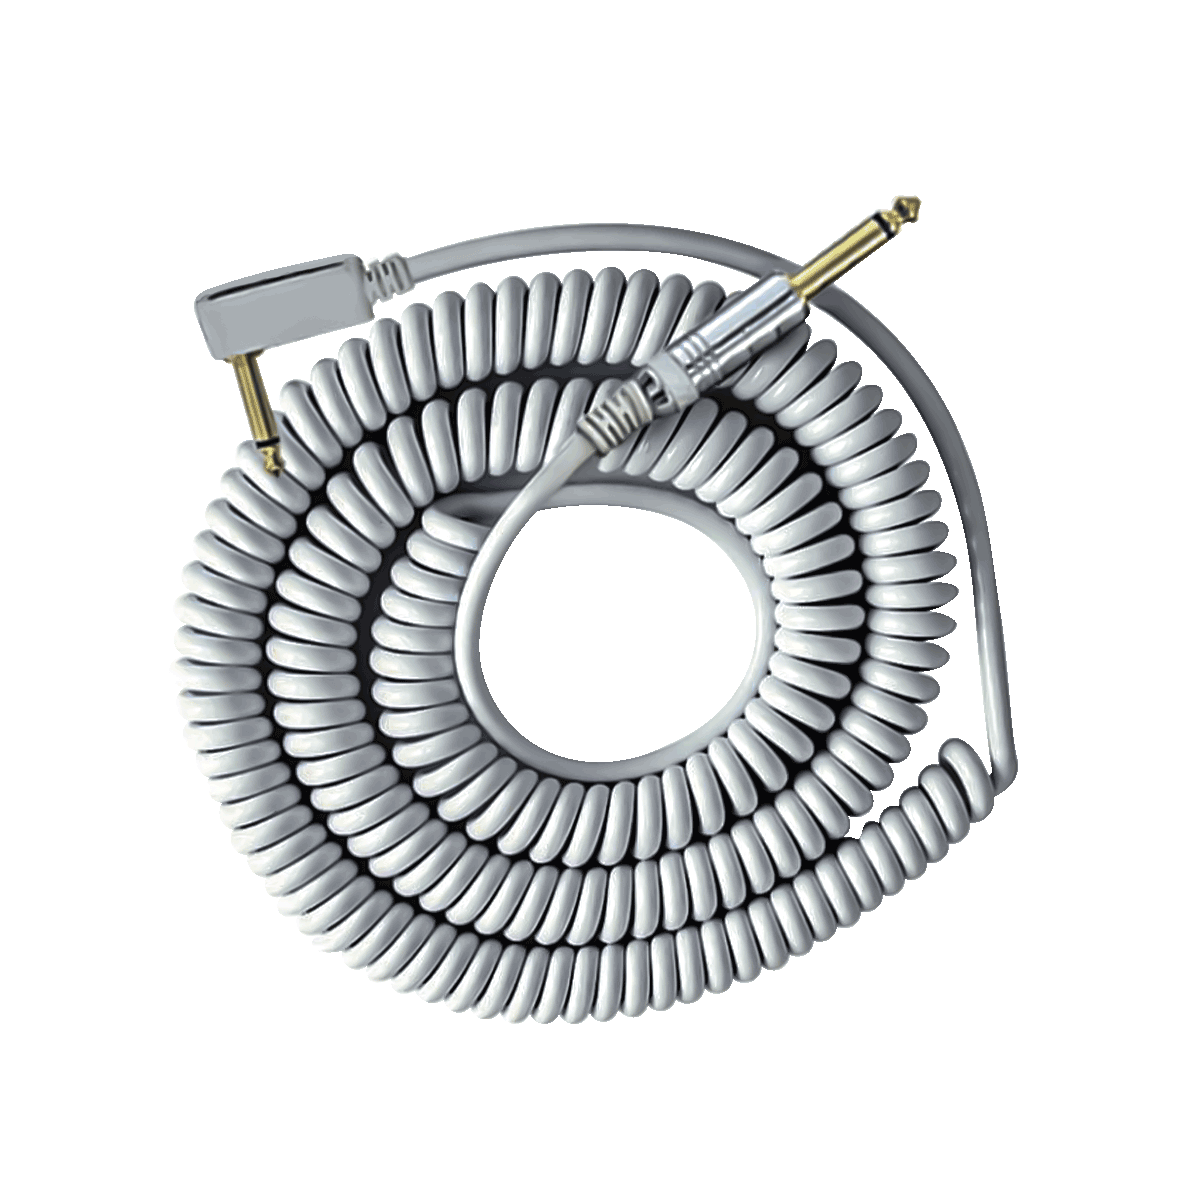 White Coiled Cable